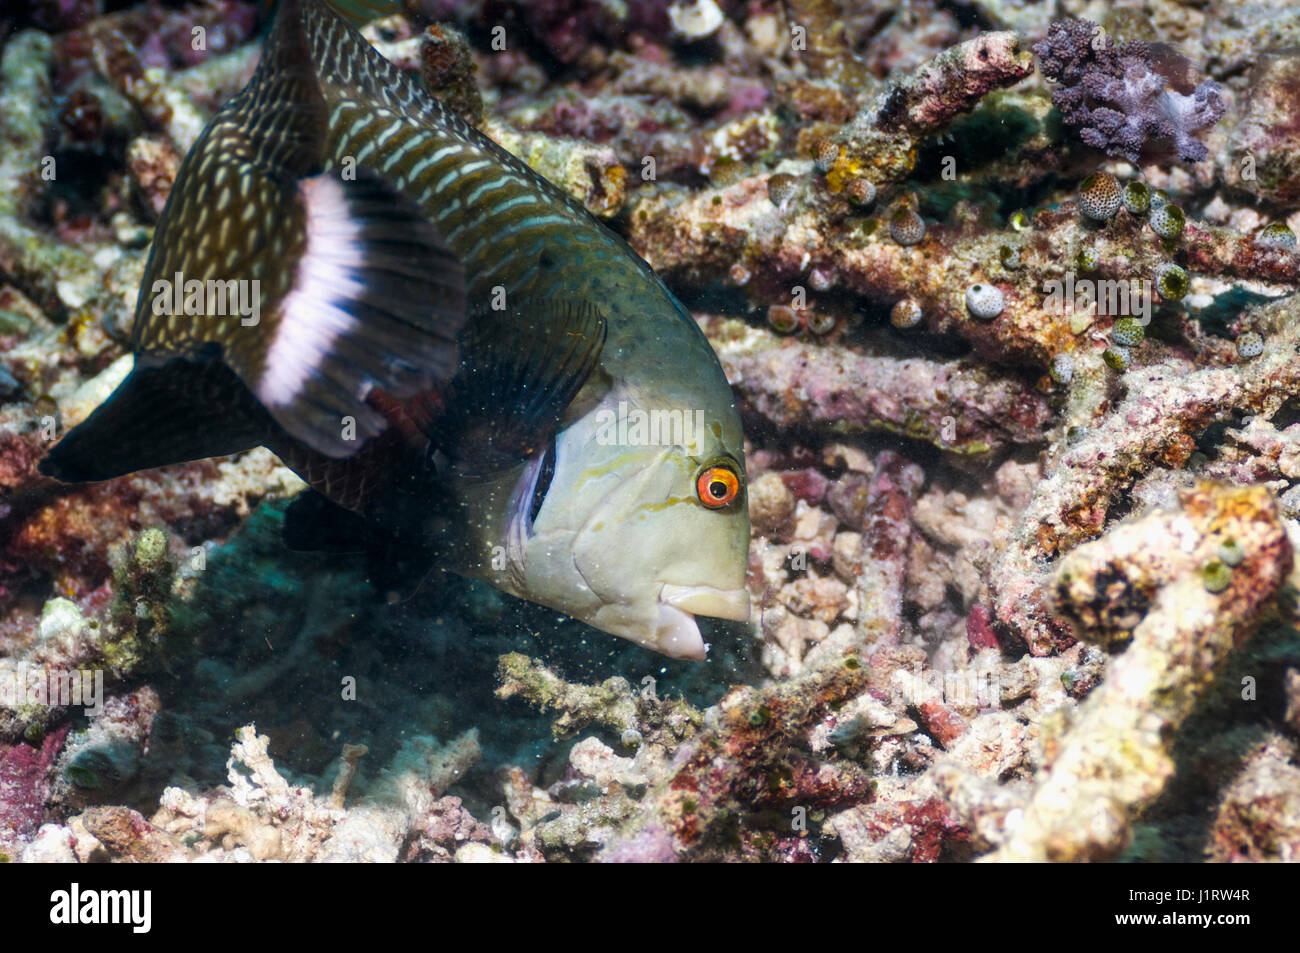 Rockmover or Dragon wrasse [Novaculichthys taeniourus] foraging over coral rubble.  Indonesia. Stock Photo